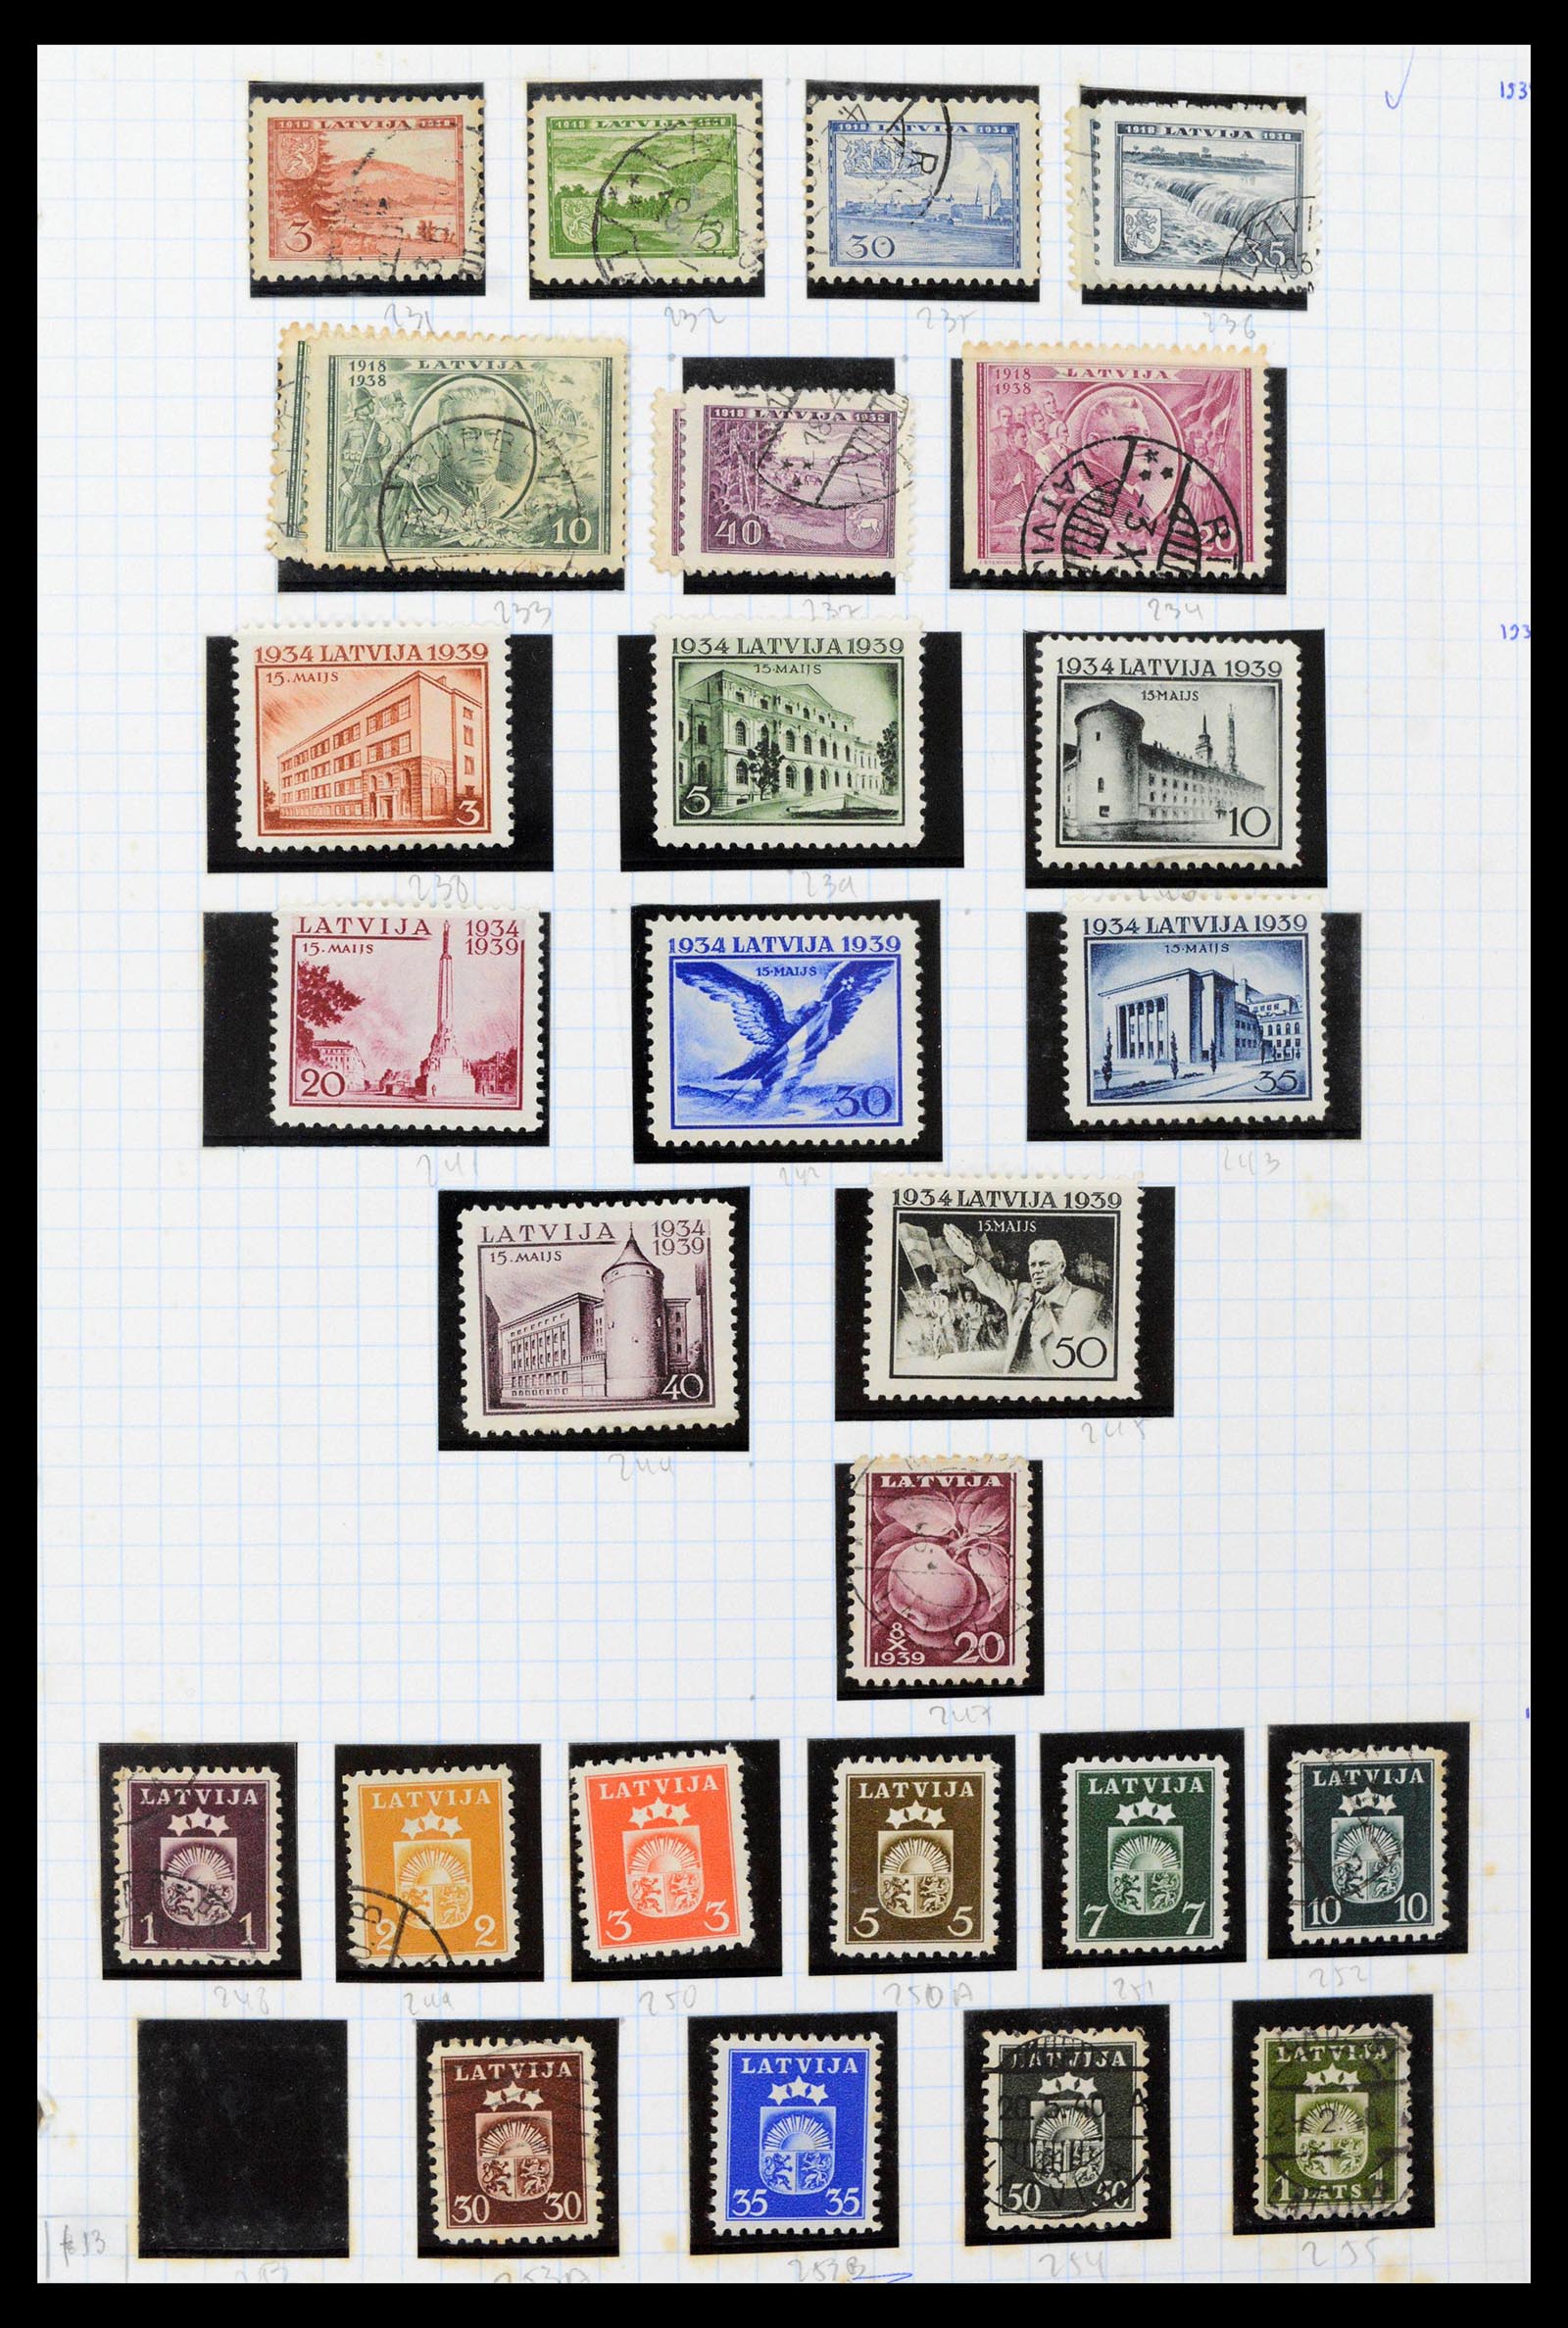 39238 0022 - Stamp collection 39238 Latvia 1919-2008.